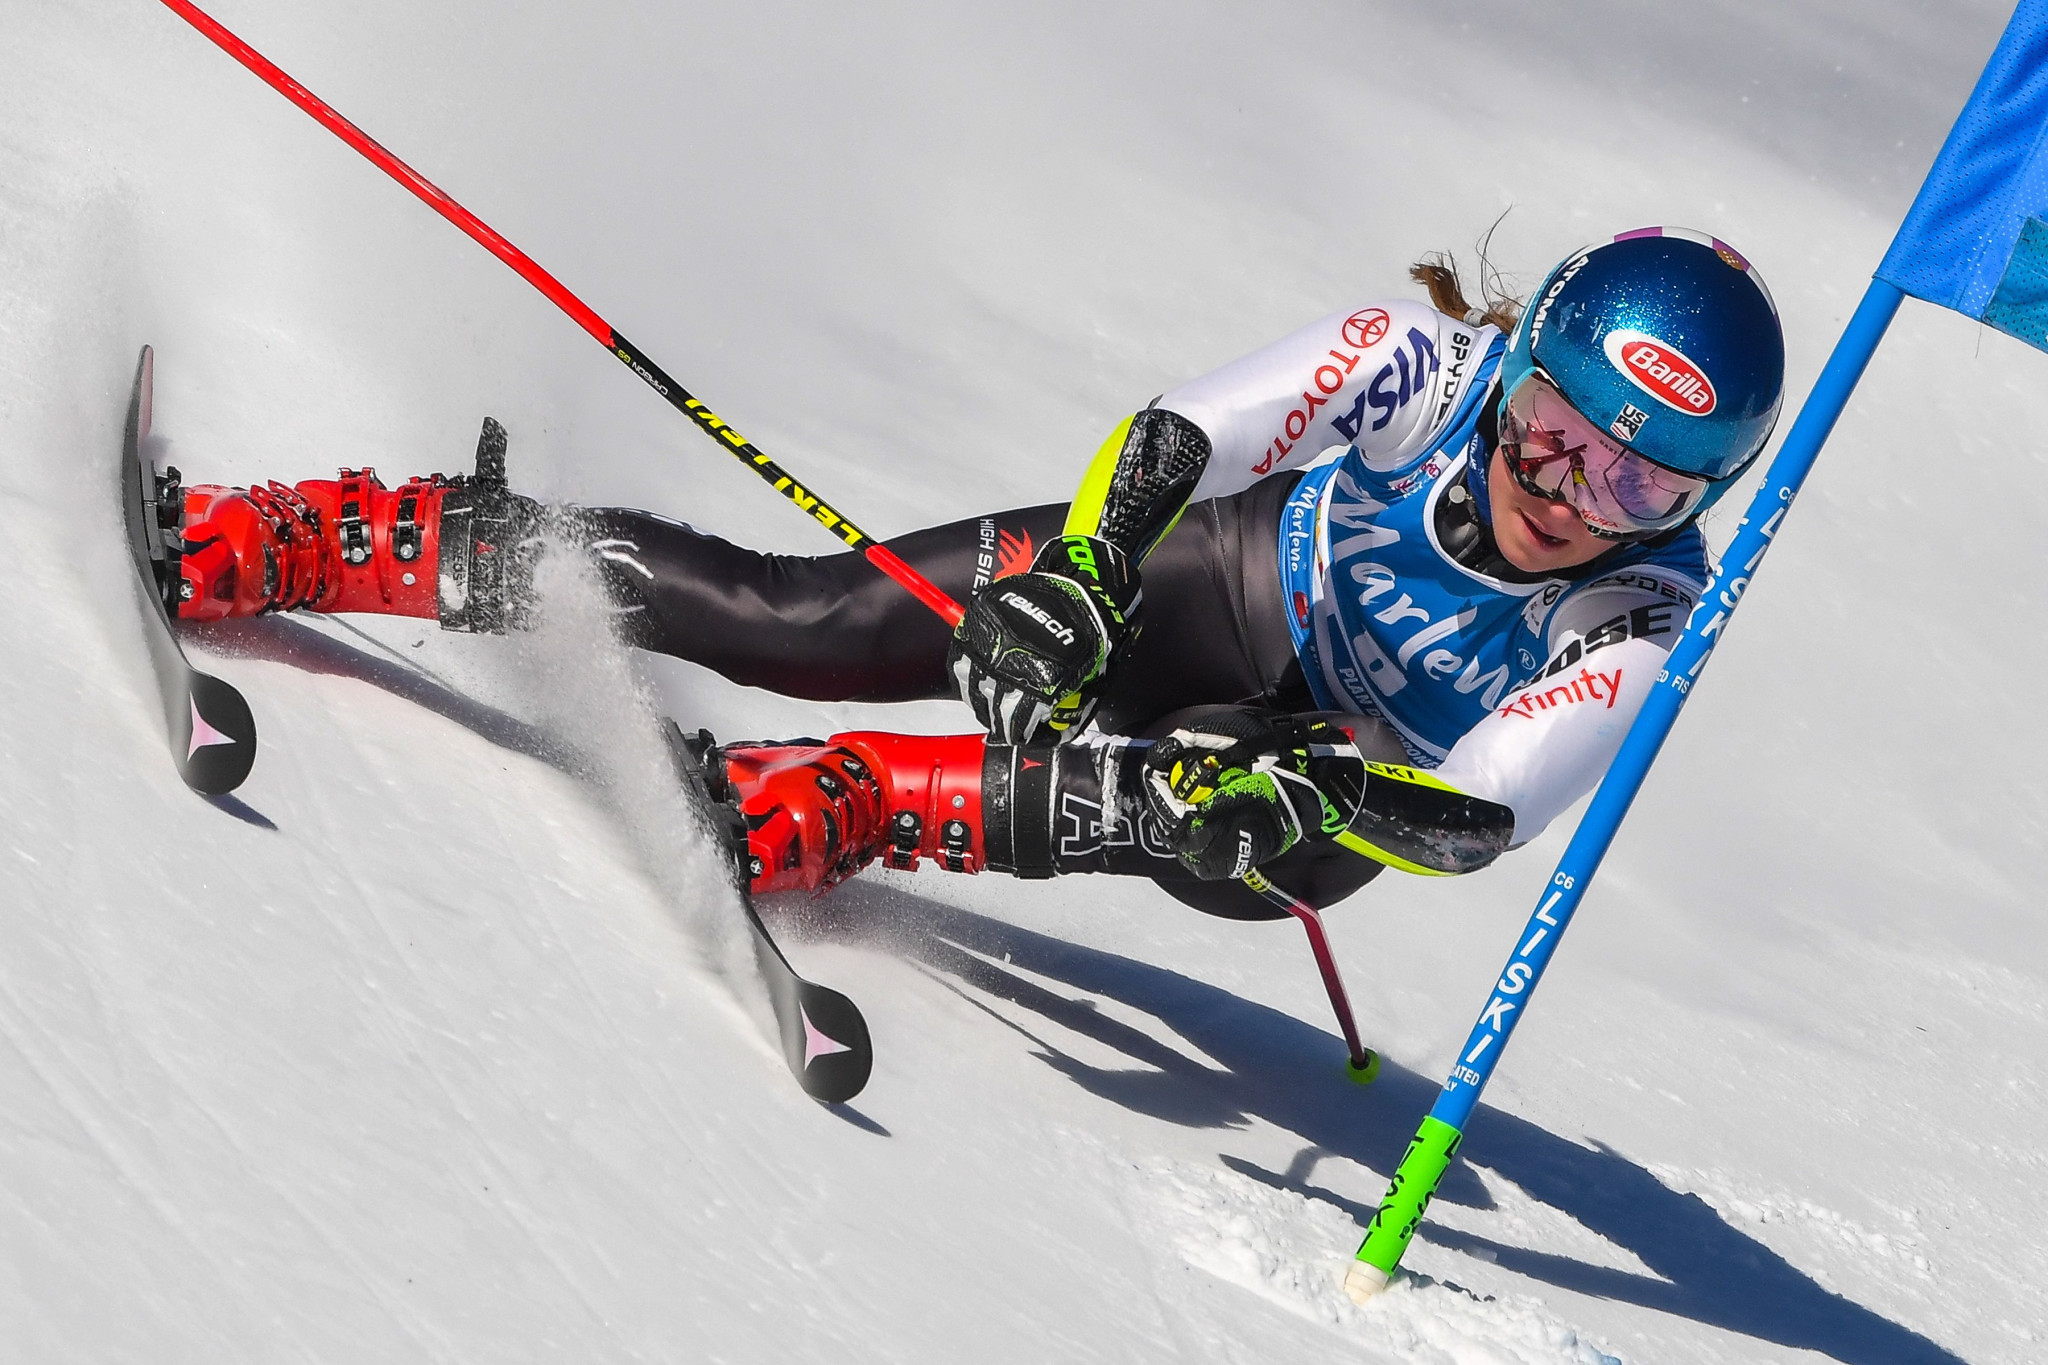 Mikaela Shiffrin converted her considerable first run lead to claim her 53rd World Cup victory ©Getty Images